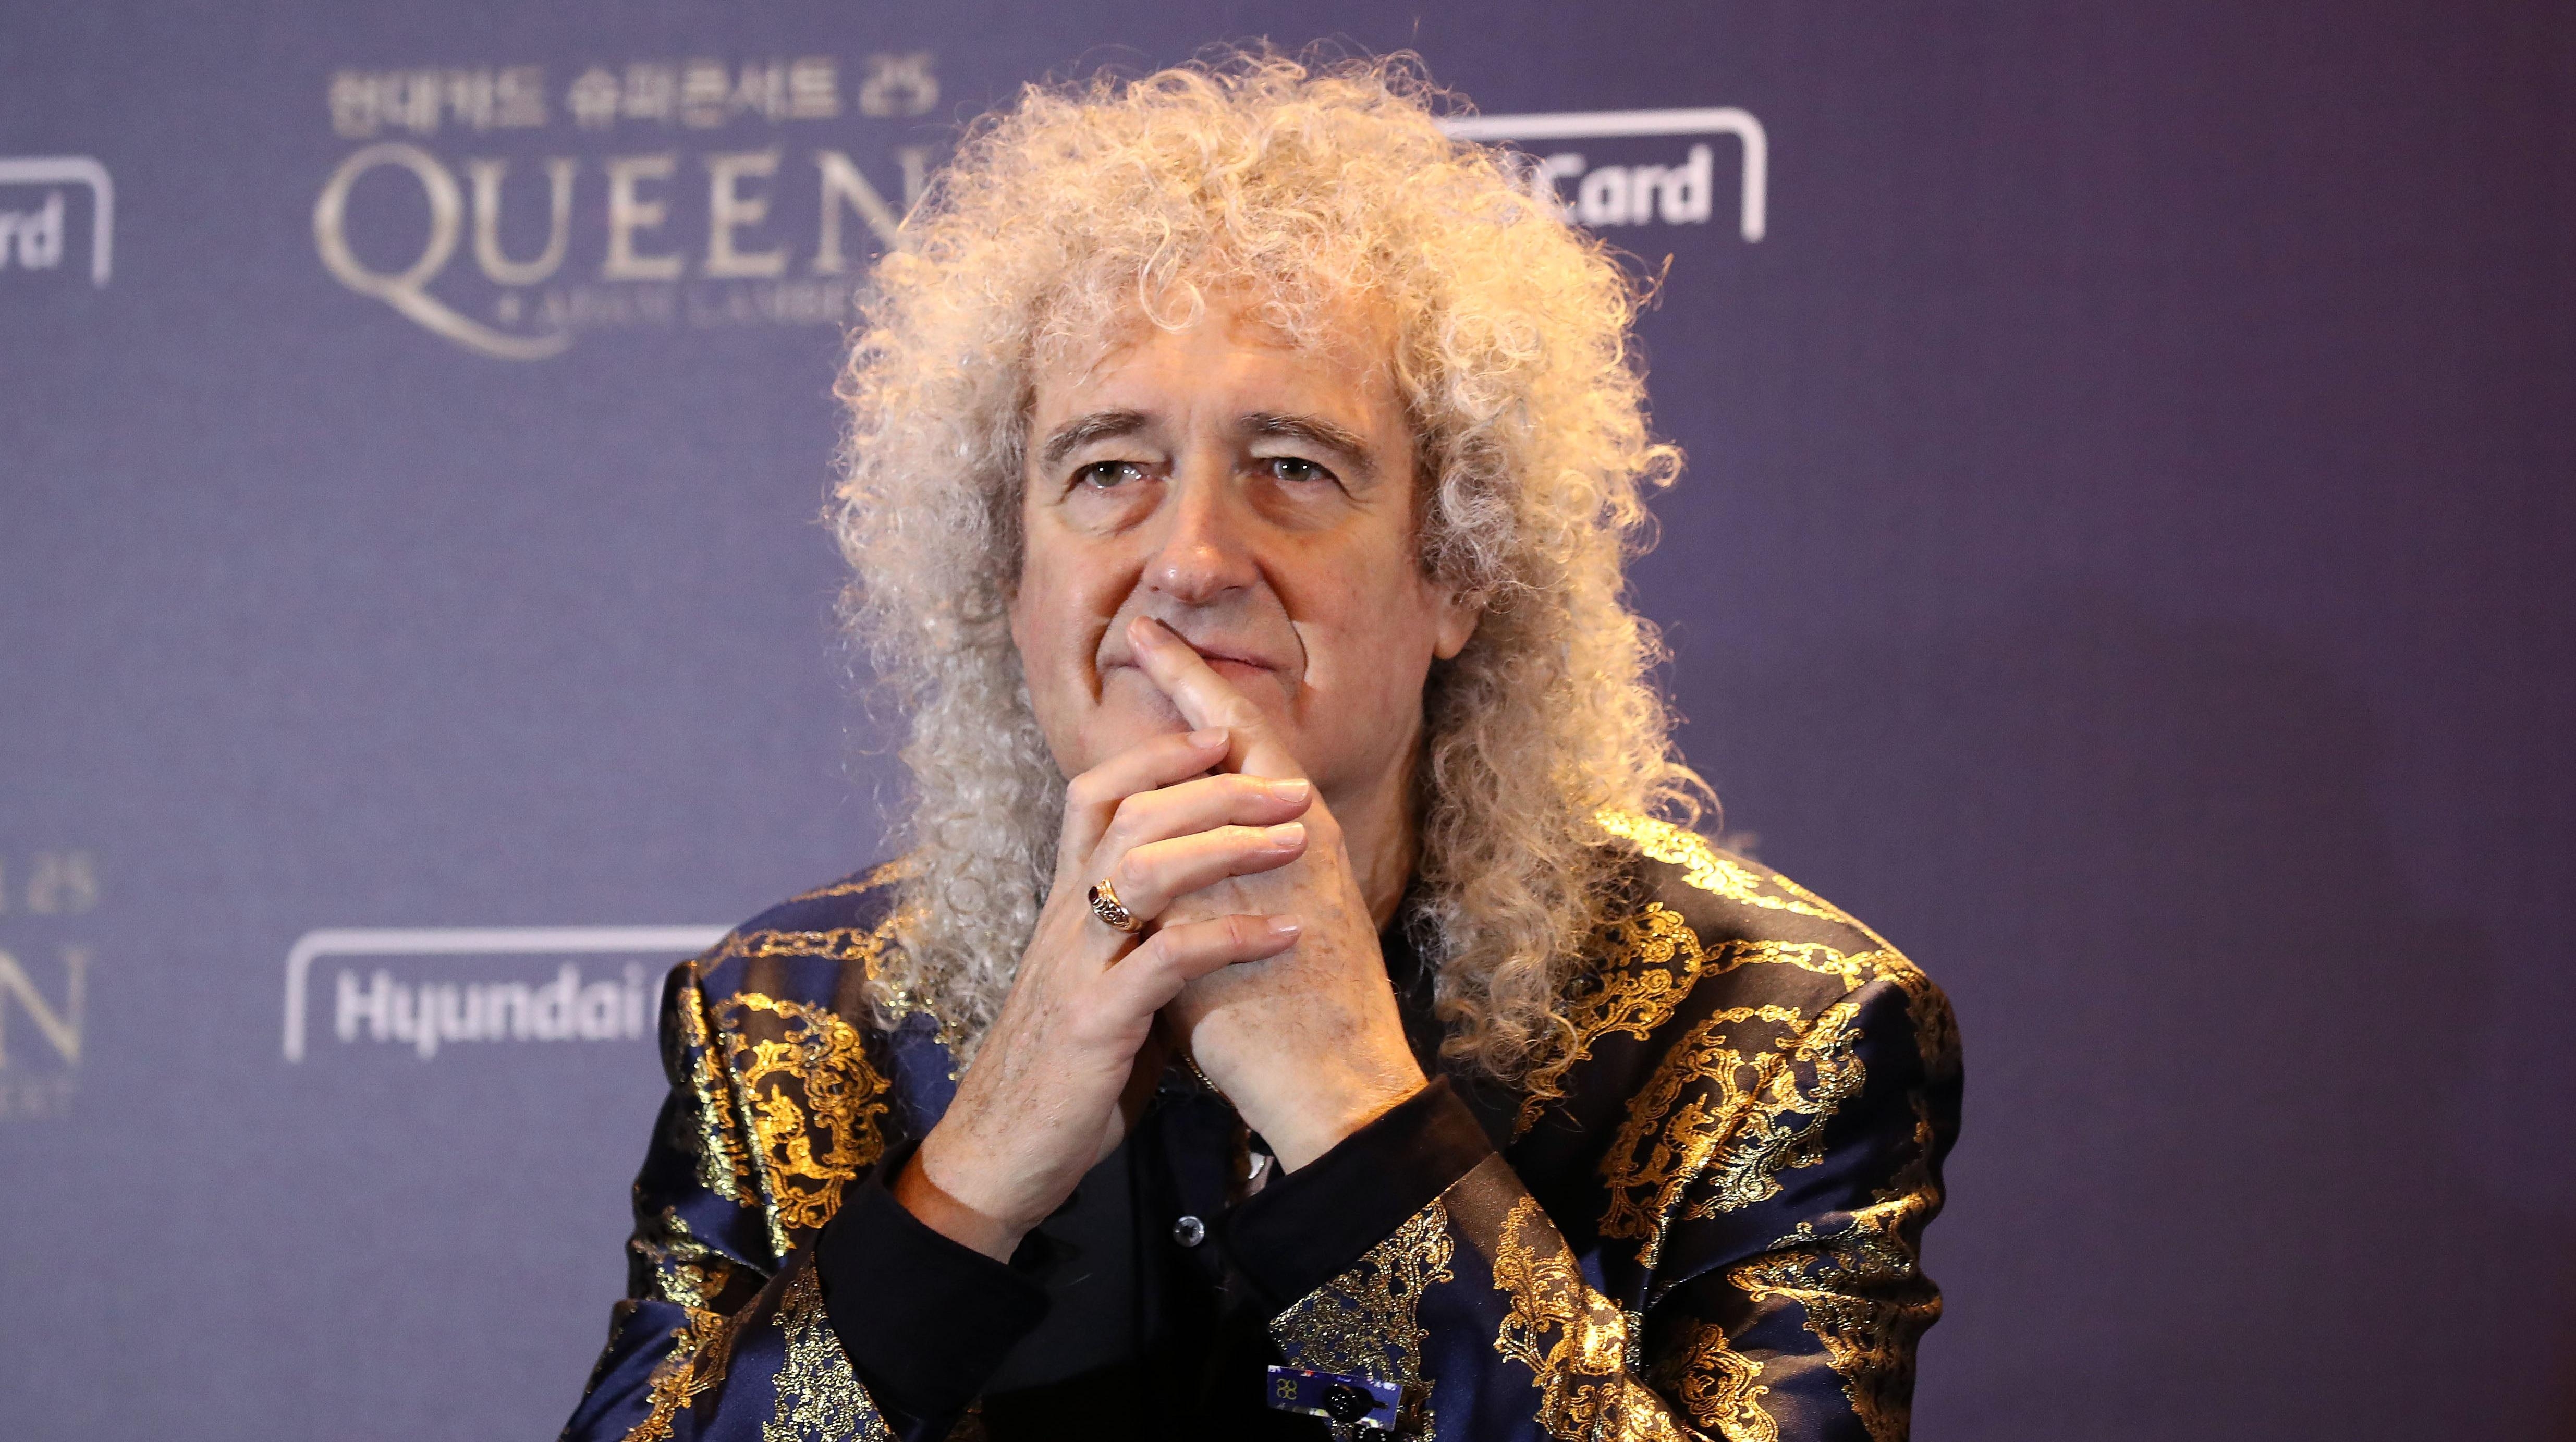 Queen’s Brian May offers clarification of odd statement about Brit Awards’ non-gendered categories